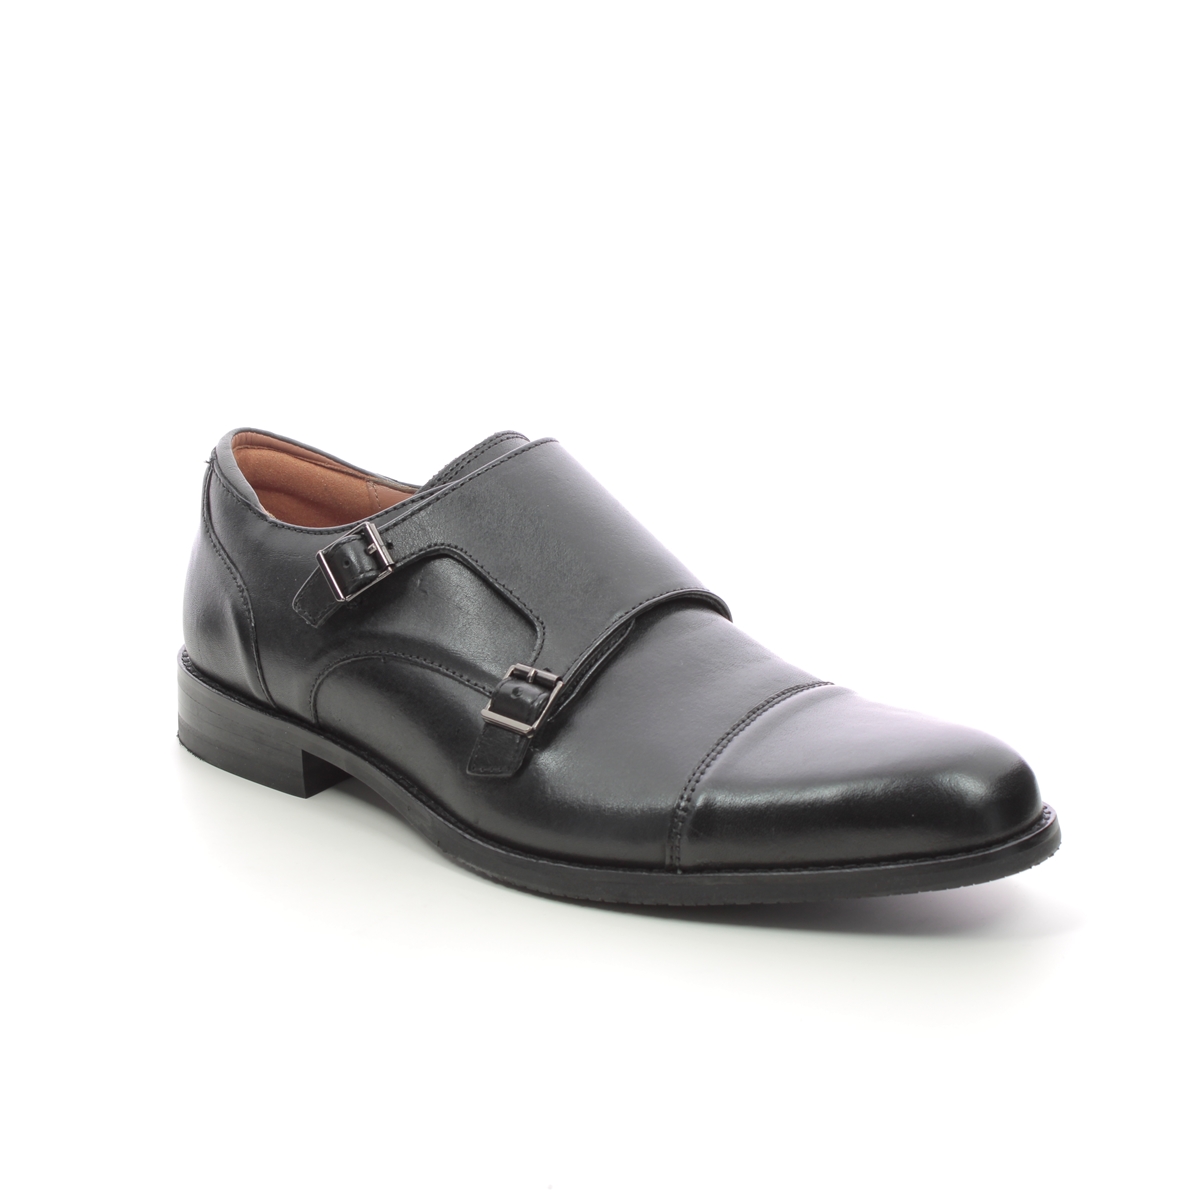 Clarks Craftarlo Monk Black Leather Mens Formal Shoes 724517G In Size 9.5 In Plain Black Leather G Width Fitting